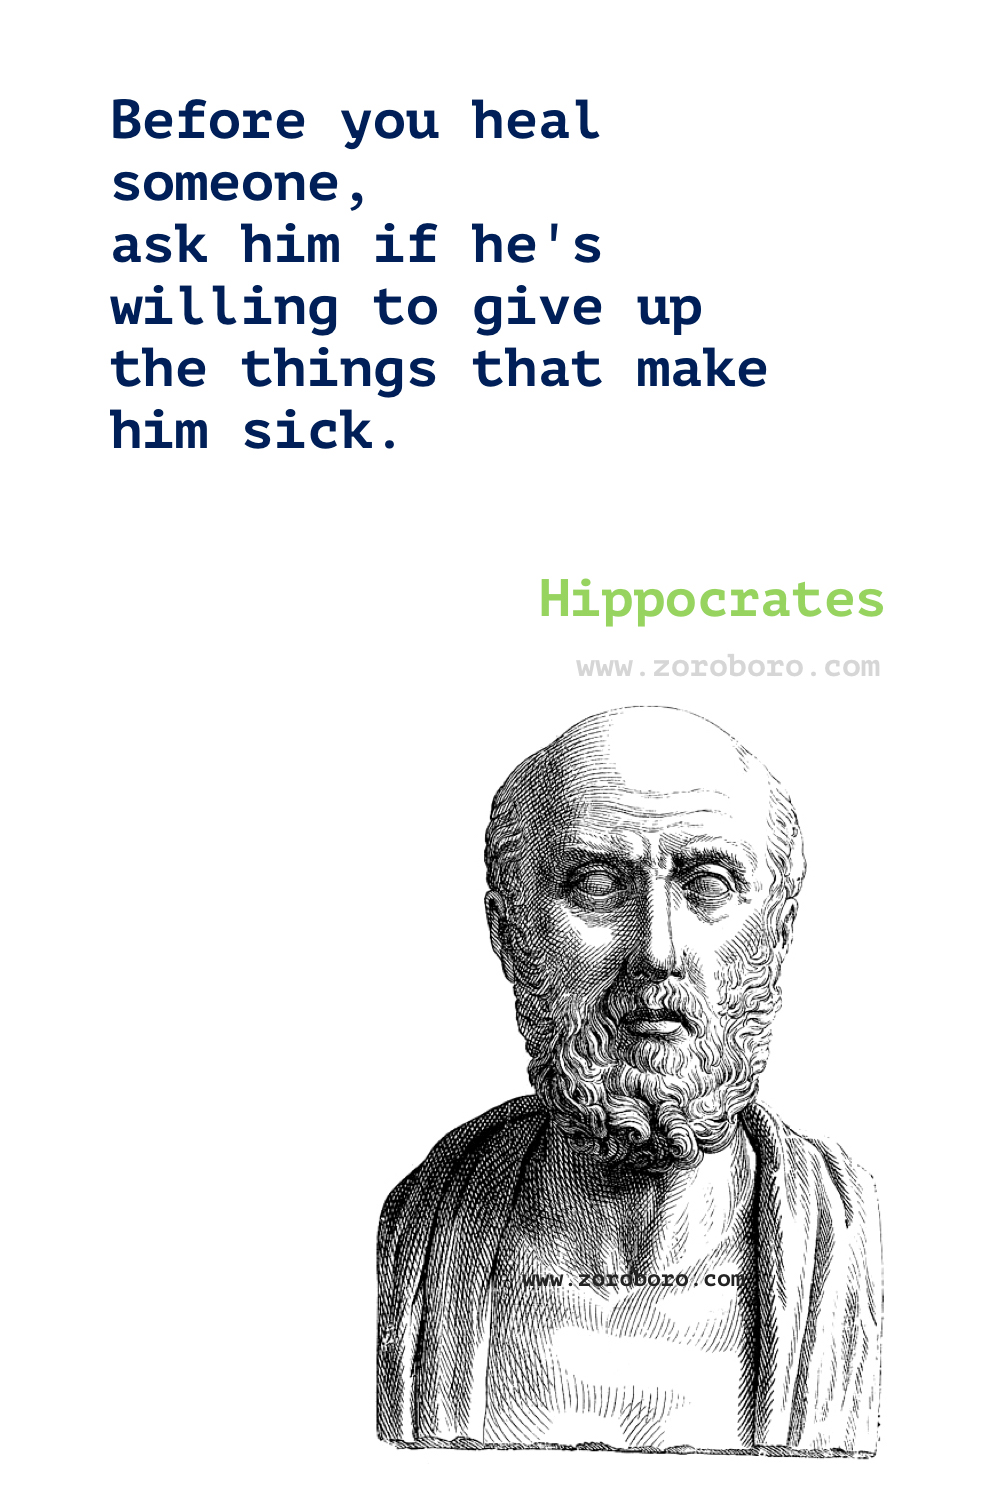 Hippocrates Quotes. Hippocrates father of medicine. Hippocrates Science Quotes. The Aphorisms of Hippocrates